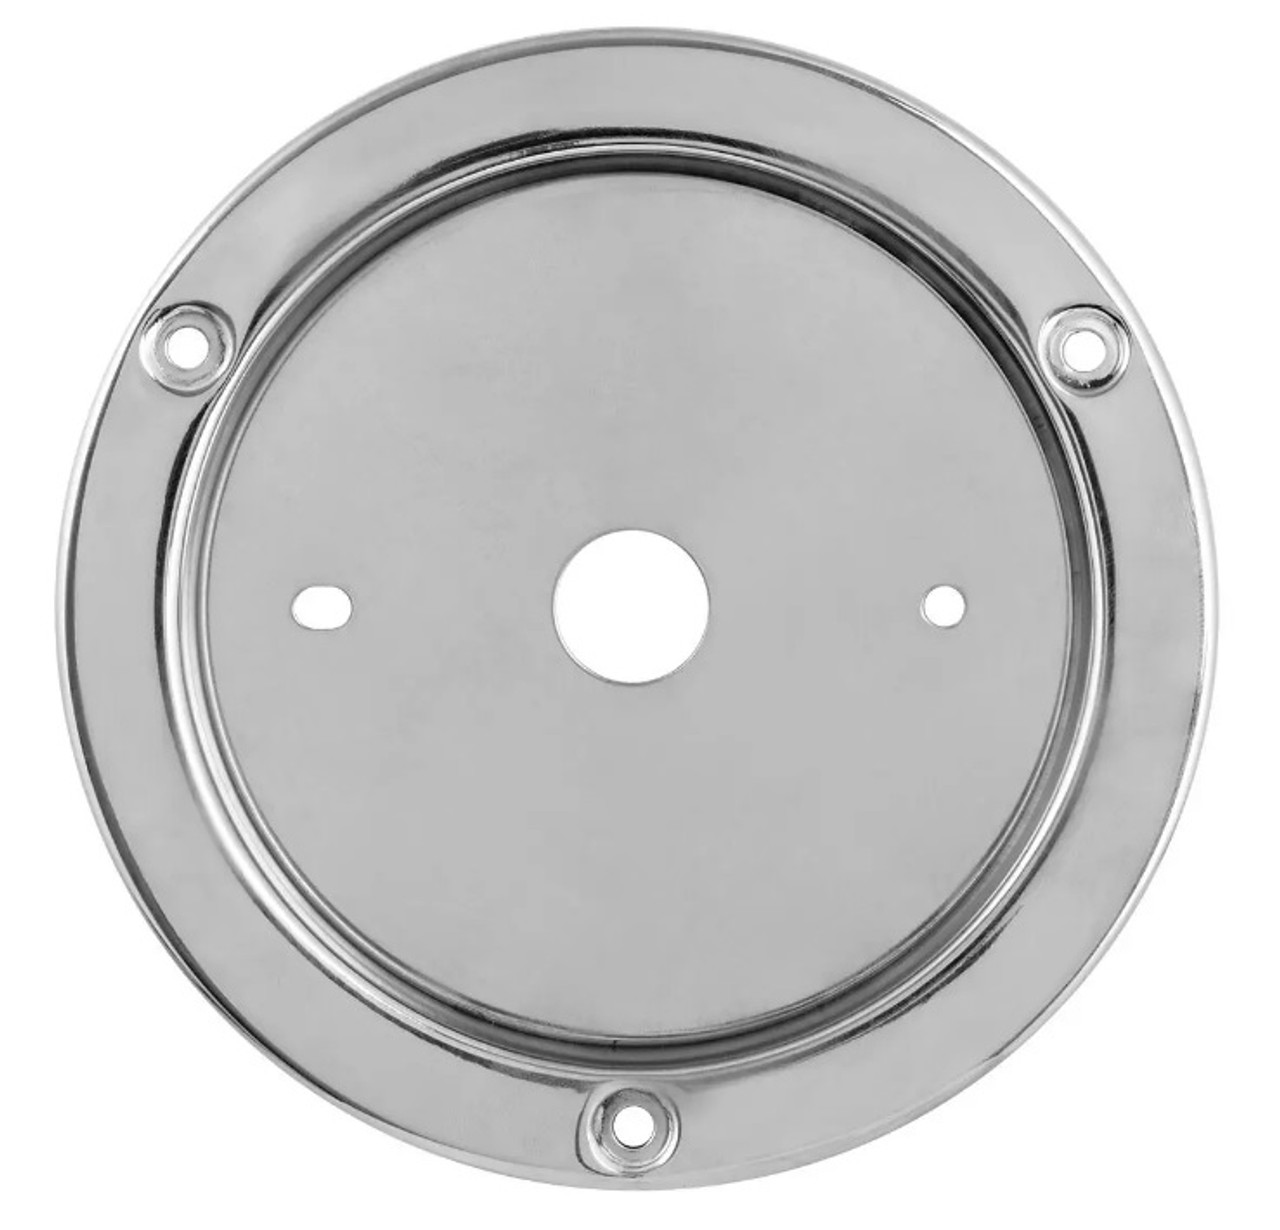 Watermelon Adaptor Plate for 4" Hole - 1 Piece Stainless Steel